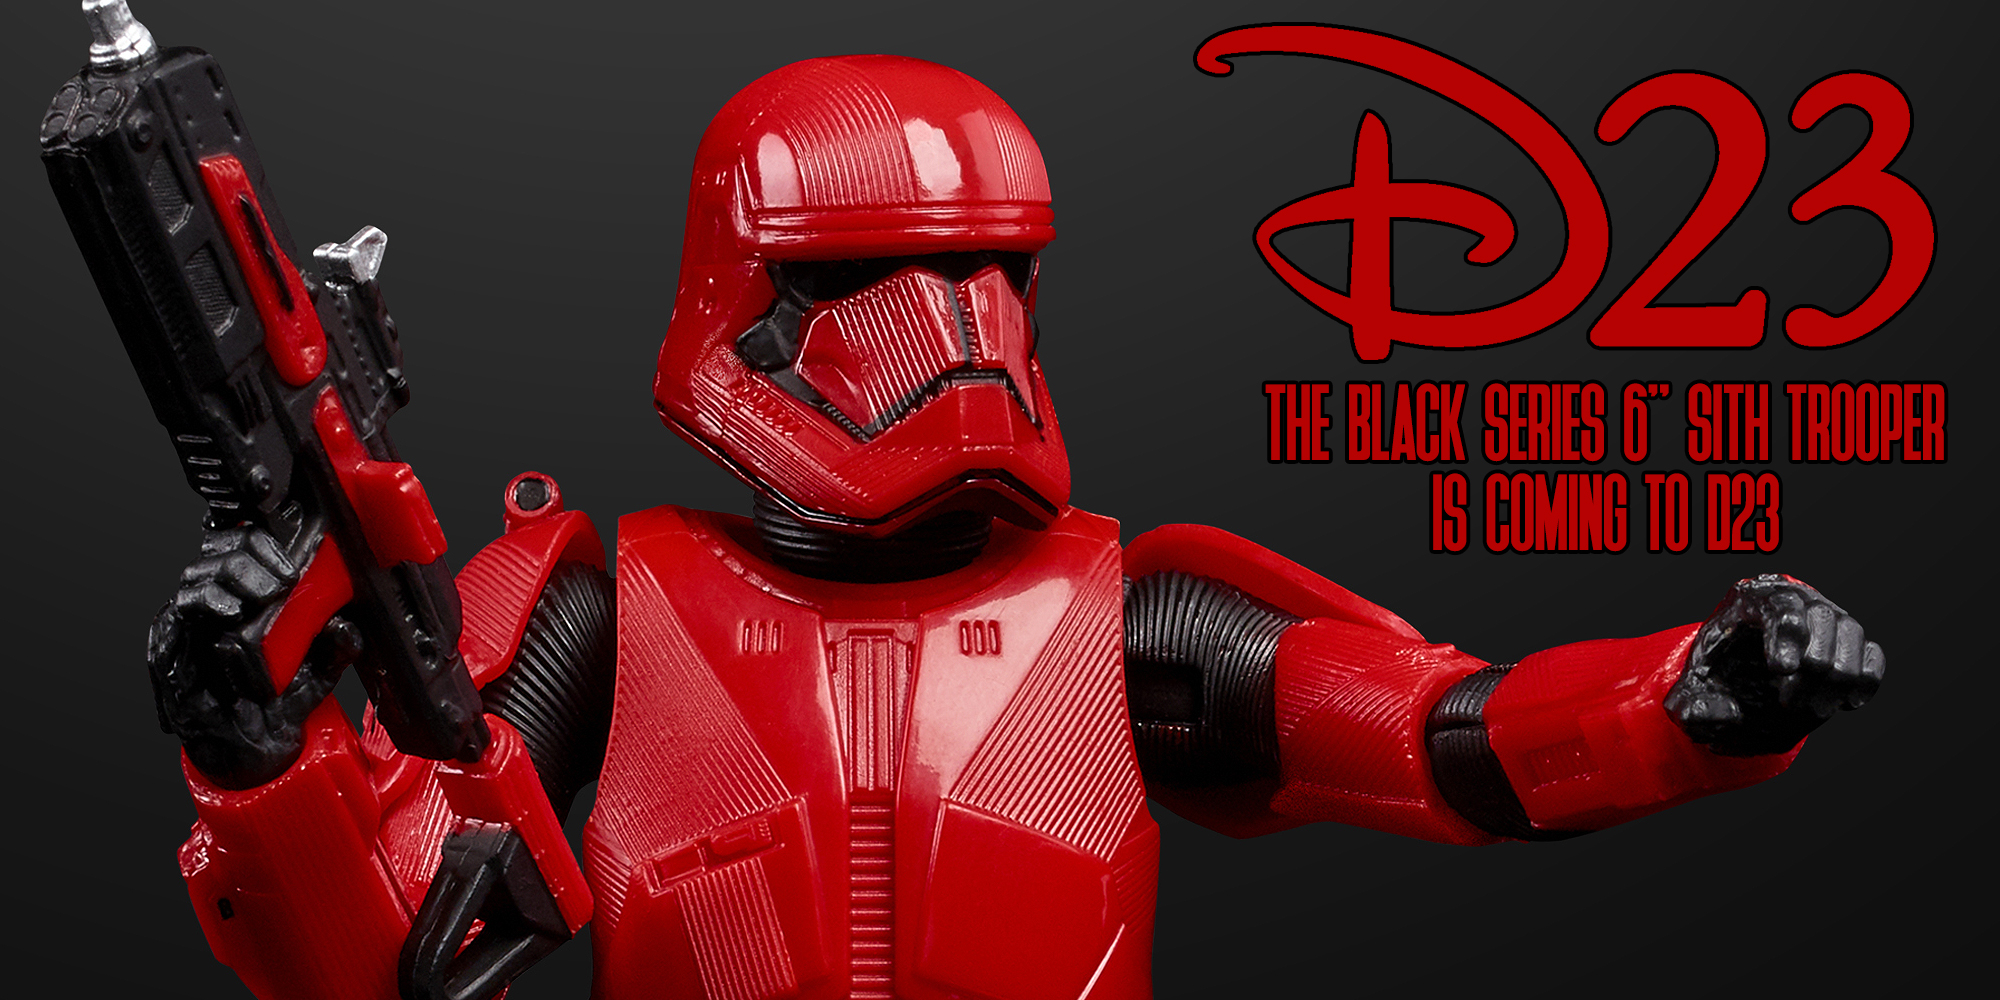 The Black Series 6" Sith Trooper Is Coming To D23